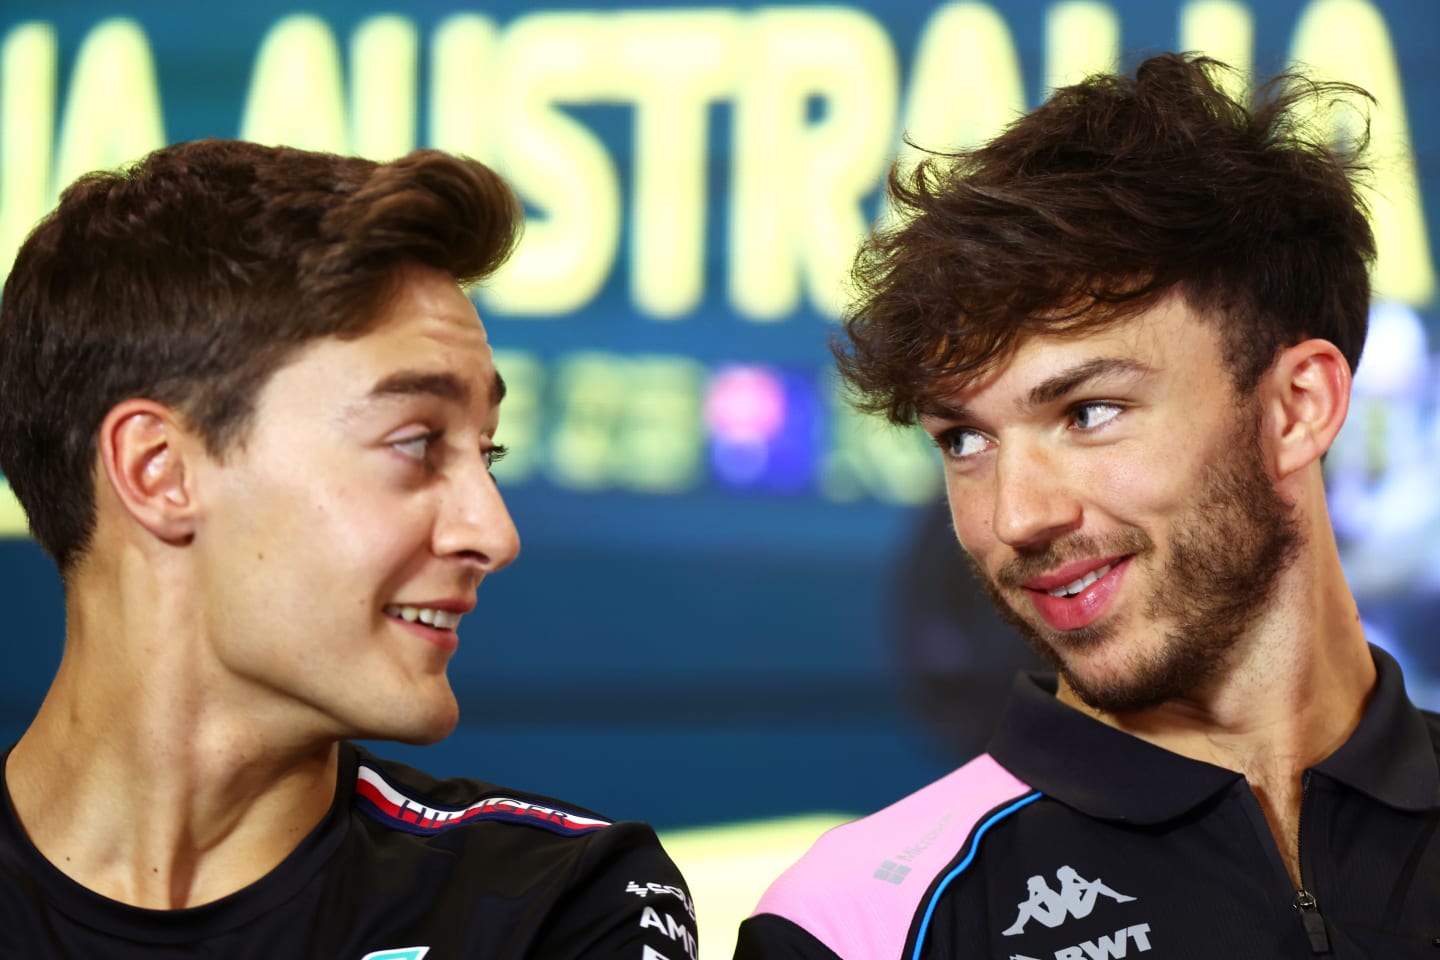 MELBOURNE, AUSTRALIA - MARCH 30: George Russell of Great Britain and Mercedes talks with Pierre Gasly of France and Alpine F1 in the Drivers Press Conference during previews ahead of the F1 Grand Prix of Australia at Albert Park Grand Prix Circuit on March 30, 2023 in Melbourne, Australia. (Photo by Dan Istitene/Getty Images)